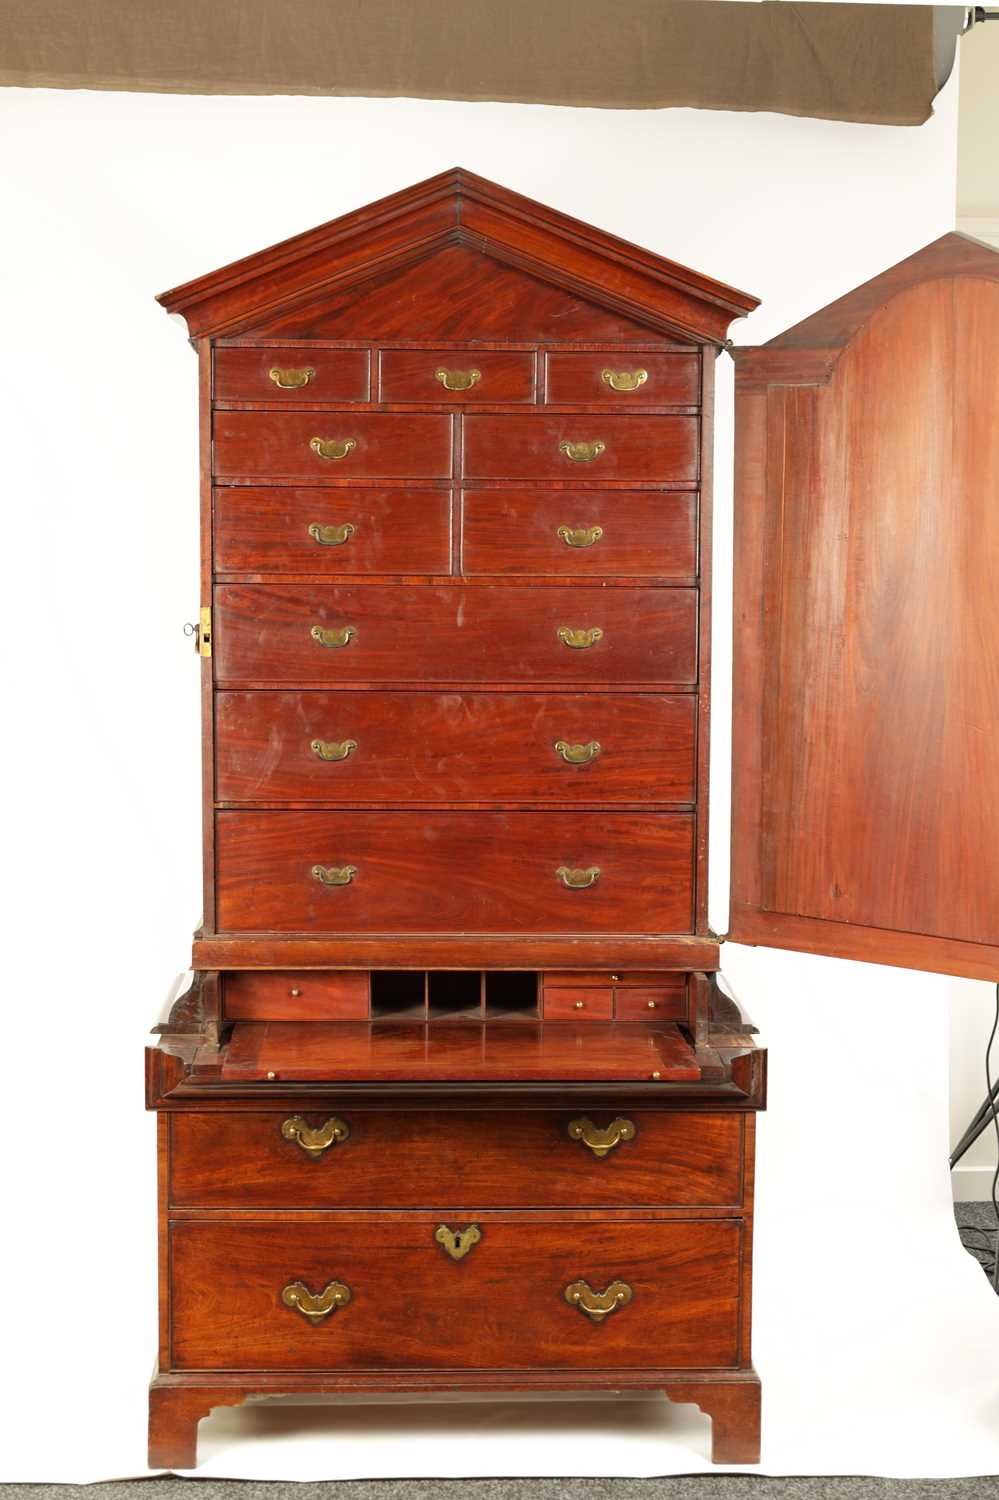 A FINE GEORGE II FIGURED MAHOGANY ARCHITECTURAL SECRETAIRE CABINET IN THE MANNER OF JOHN CHANNON - Image 4 of 14